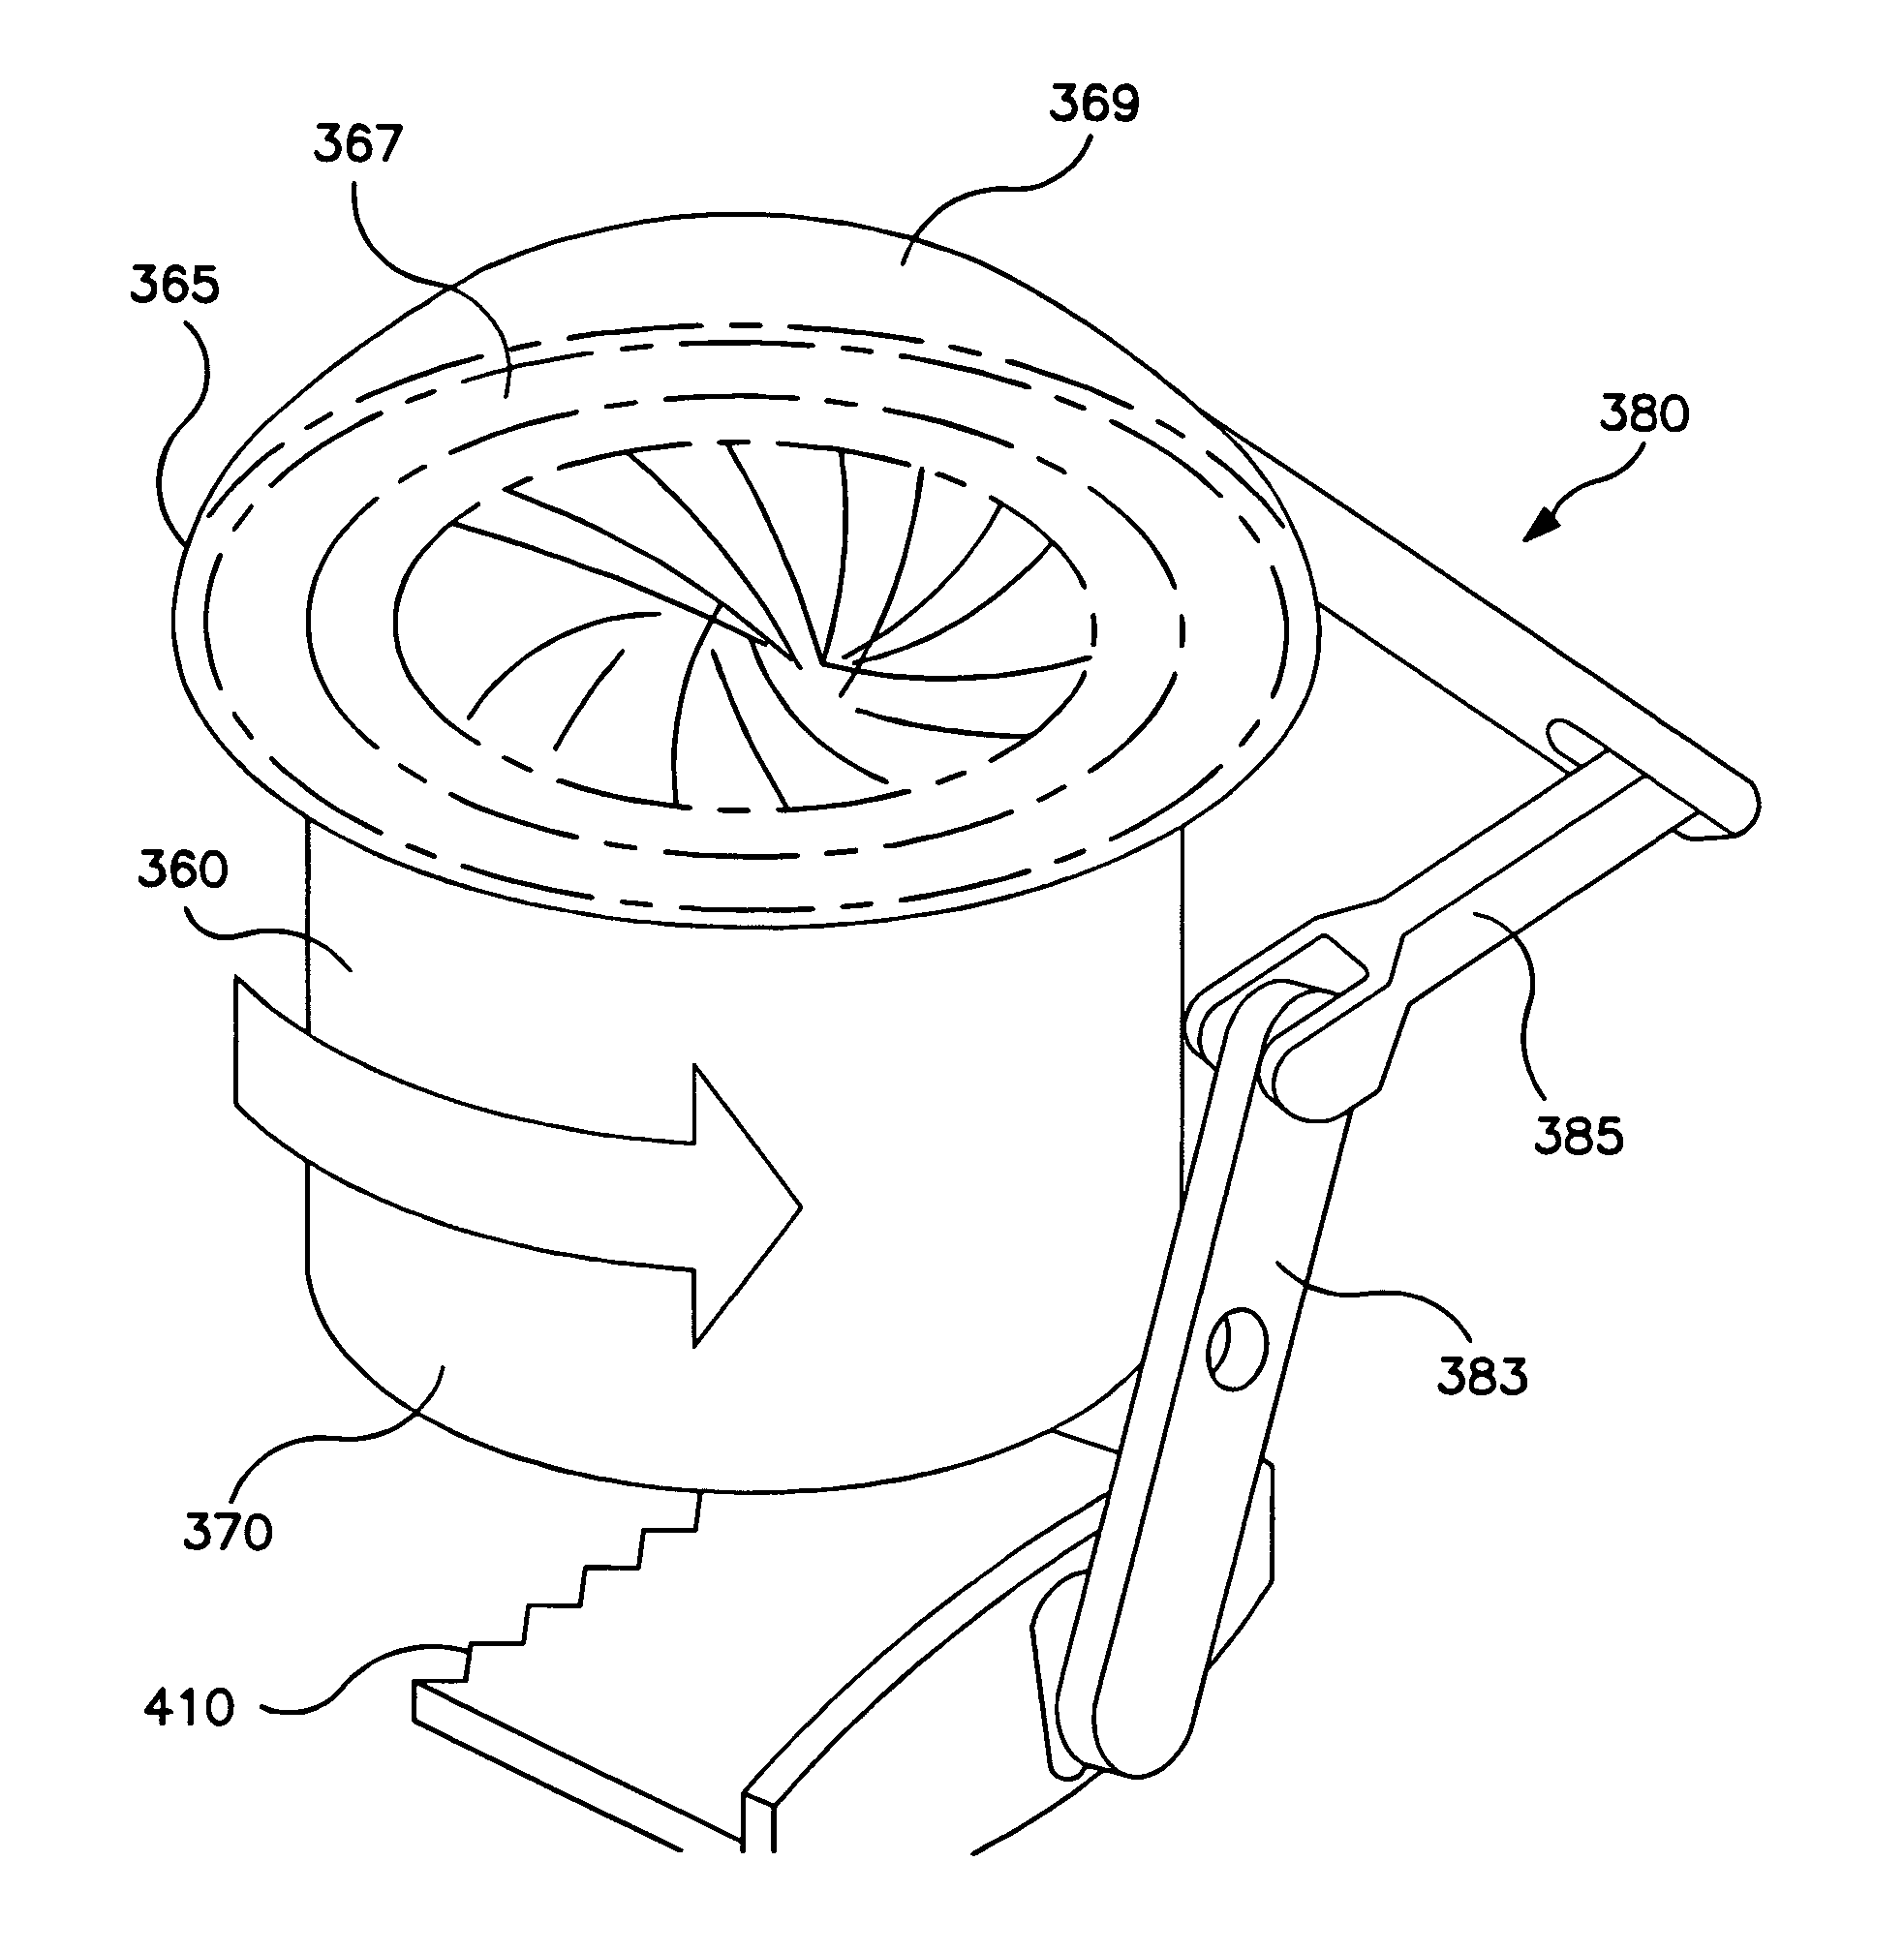 Waste disposal device including an external actuation mechanism to operate a cartridge